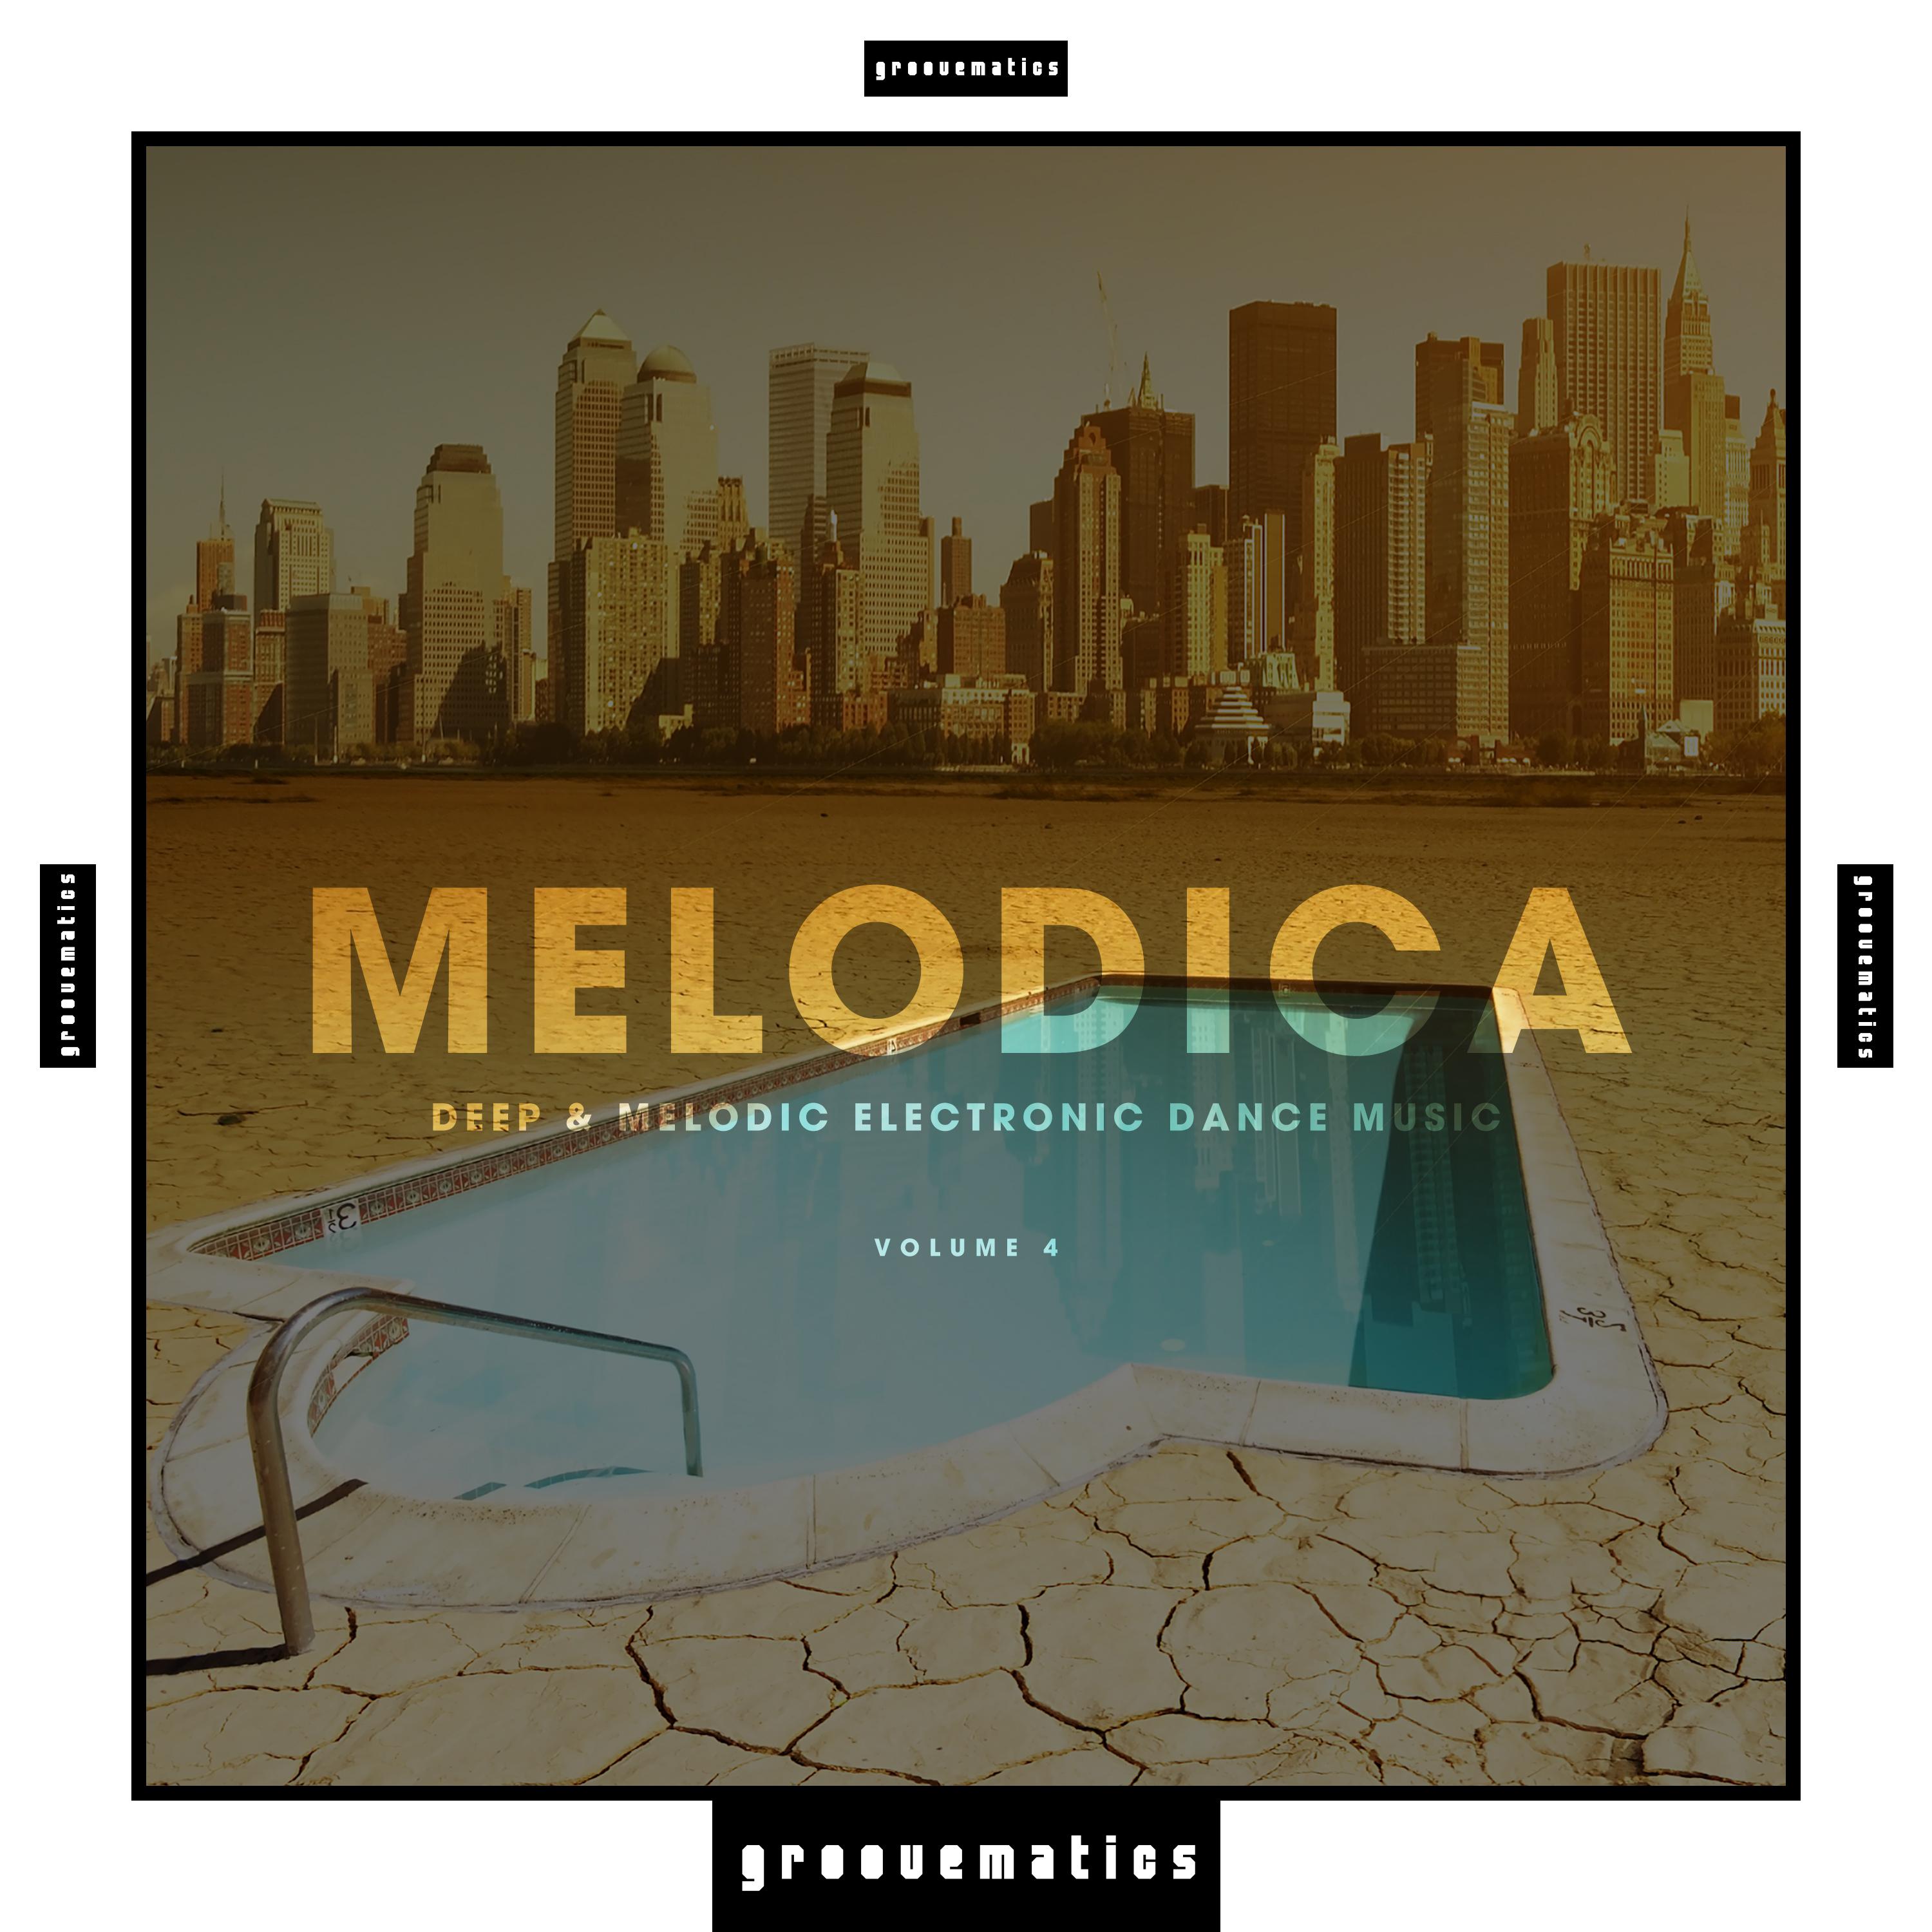 Melodica - (Deep & Melodic Electronic Dance Music), Vol. 4